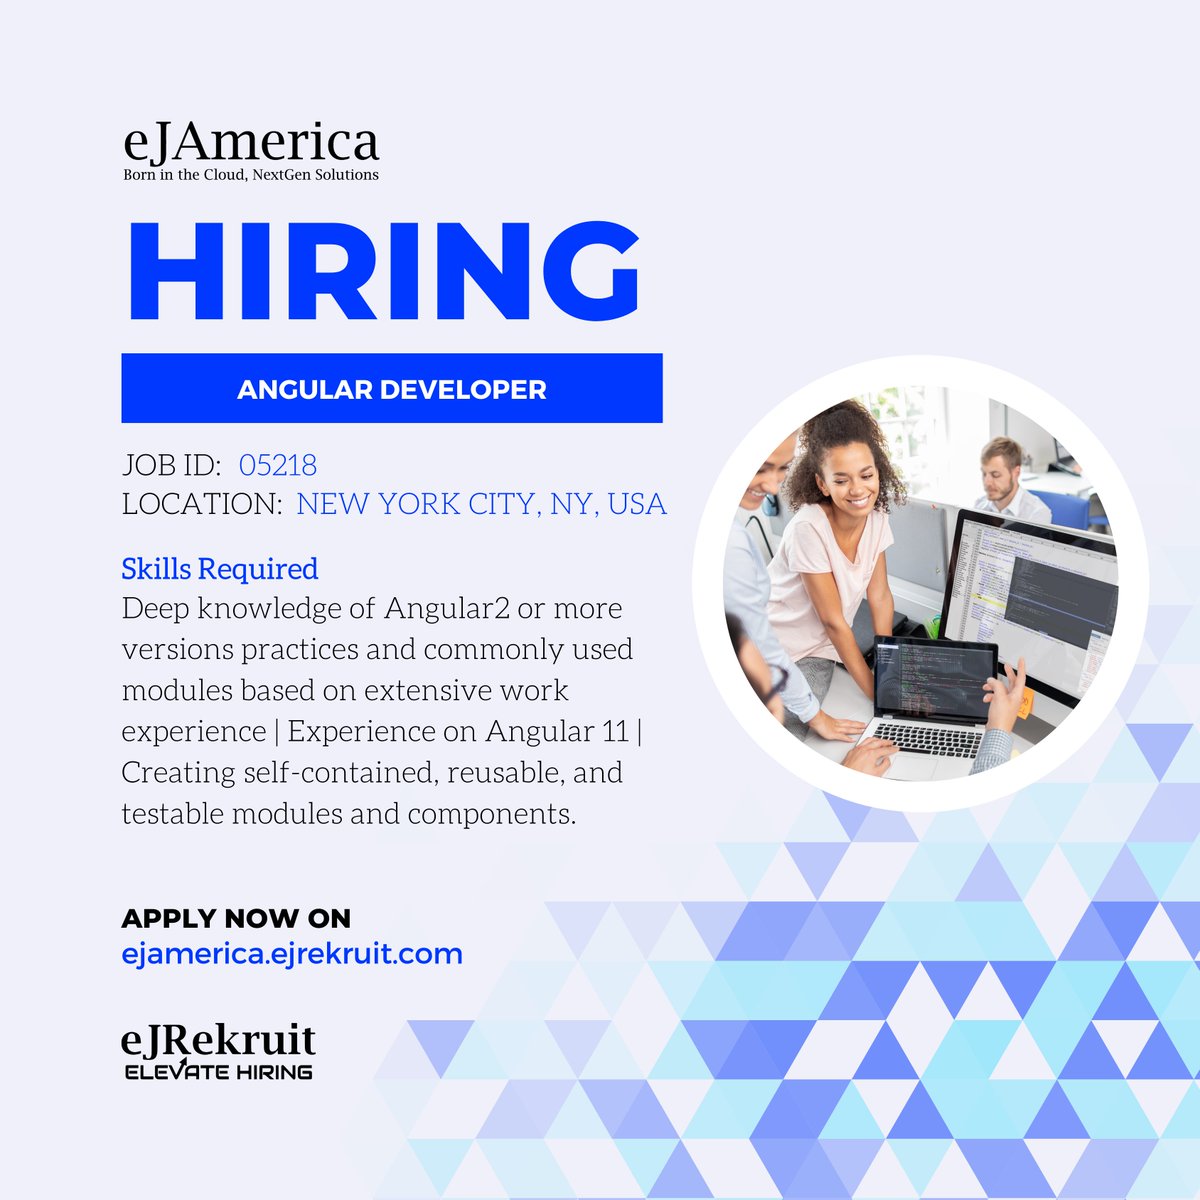 Apply Now - ow.ly/pltv50NCU1e

Want to work on meaningful projects that impact users? We're looking for an Angular developer to help us achieve this goal.

#angulardeveloper #angularjobs #hiringangulardeveloper #angularjobopening #angularjs #jobopening #hiringnow